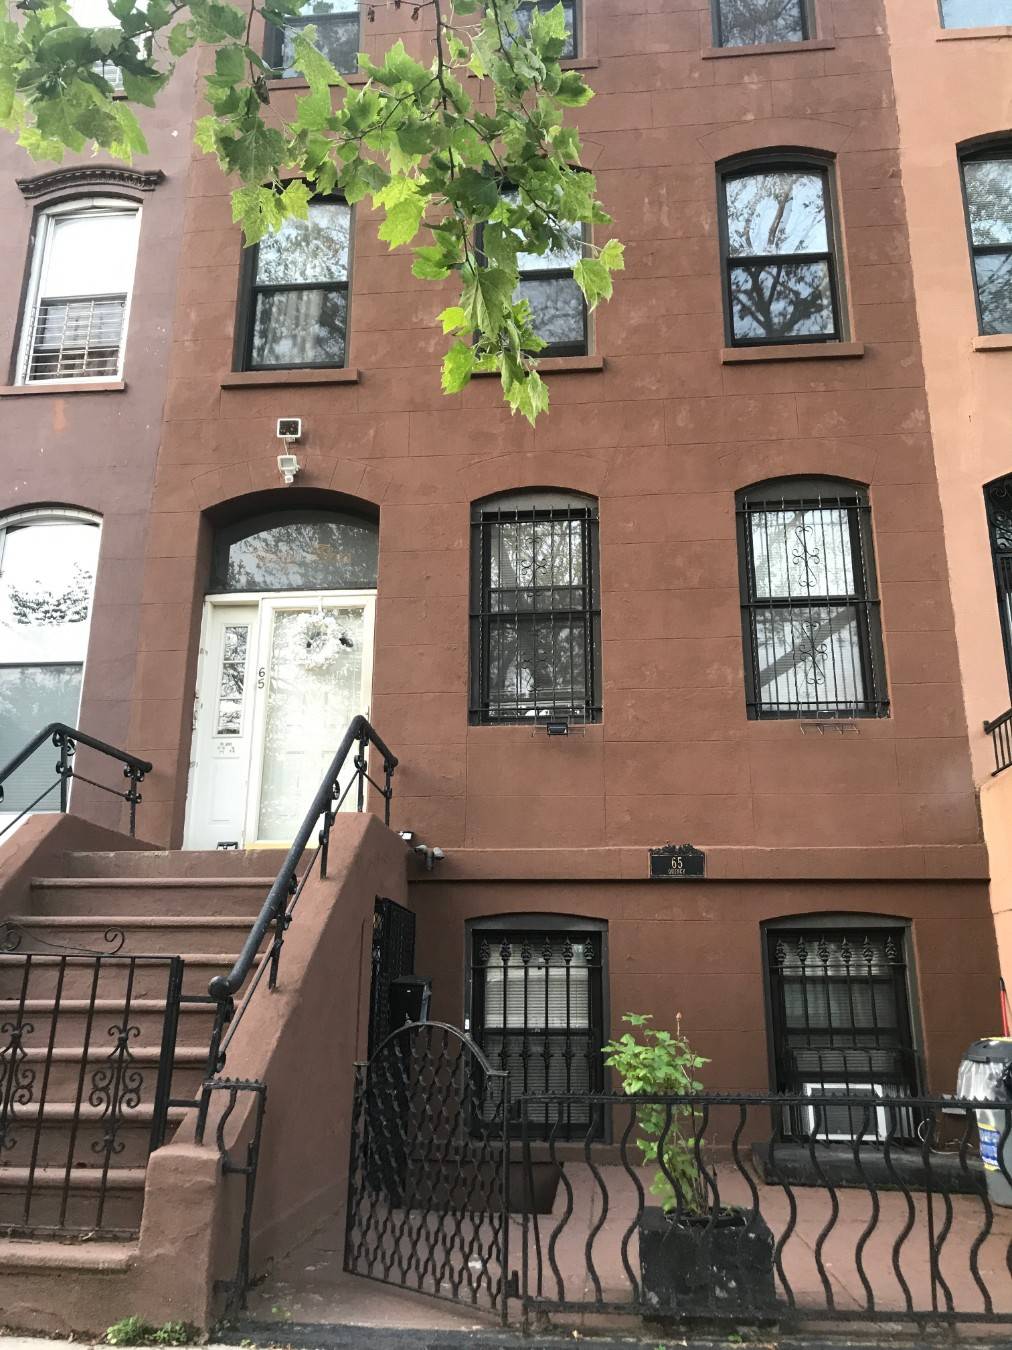 You won't want to miss this amazing opportunity to own a breathtaking four story 3, 200 SF Brownstone located in one of Bedford Stuyvesant's most beautiful tree lined blocks.